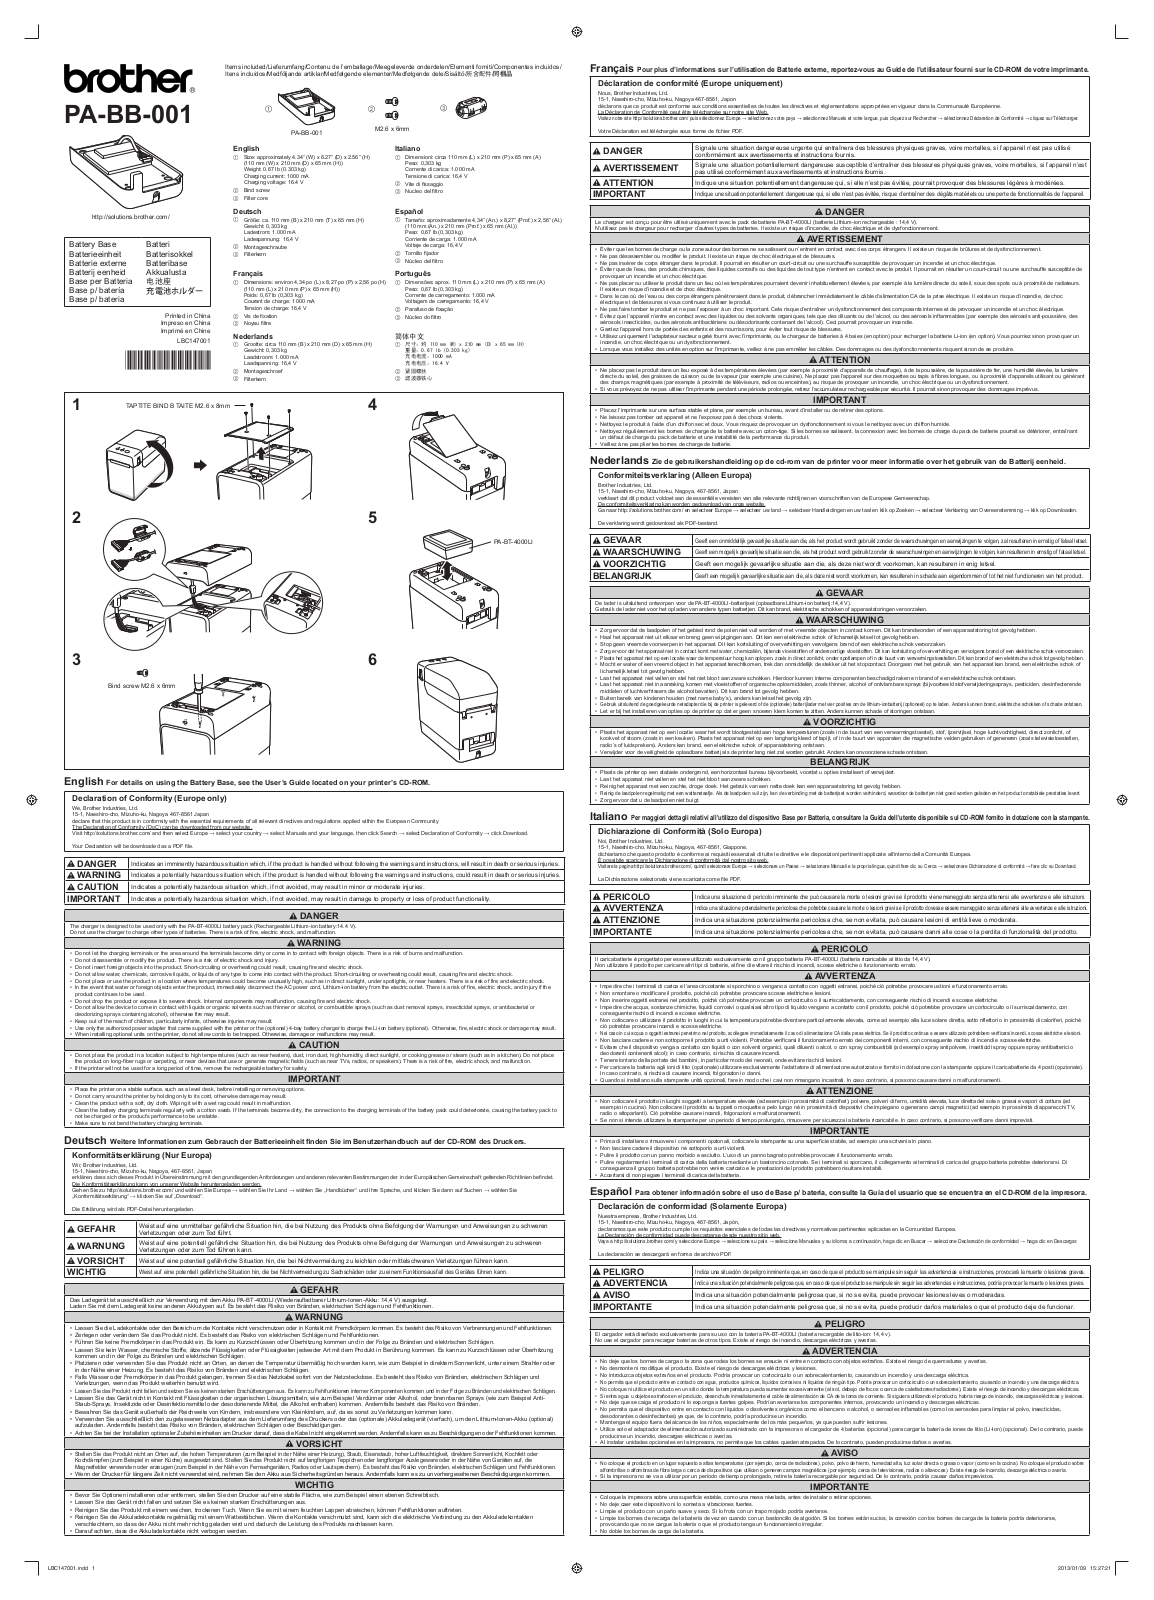 Brother PA-BB-001 User Manual